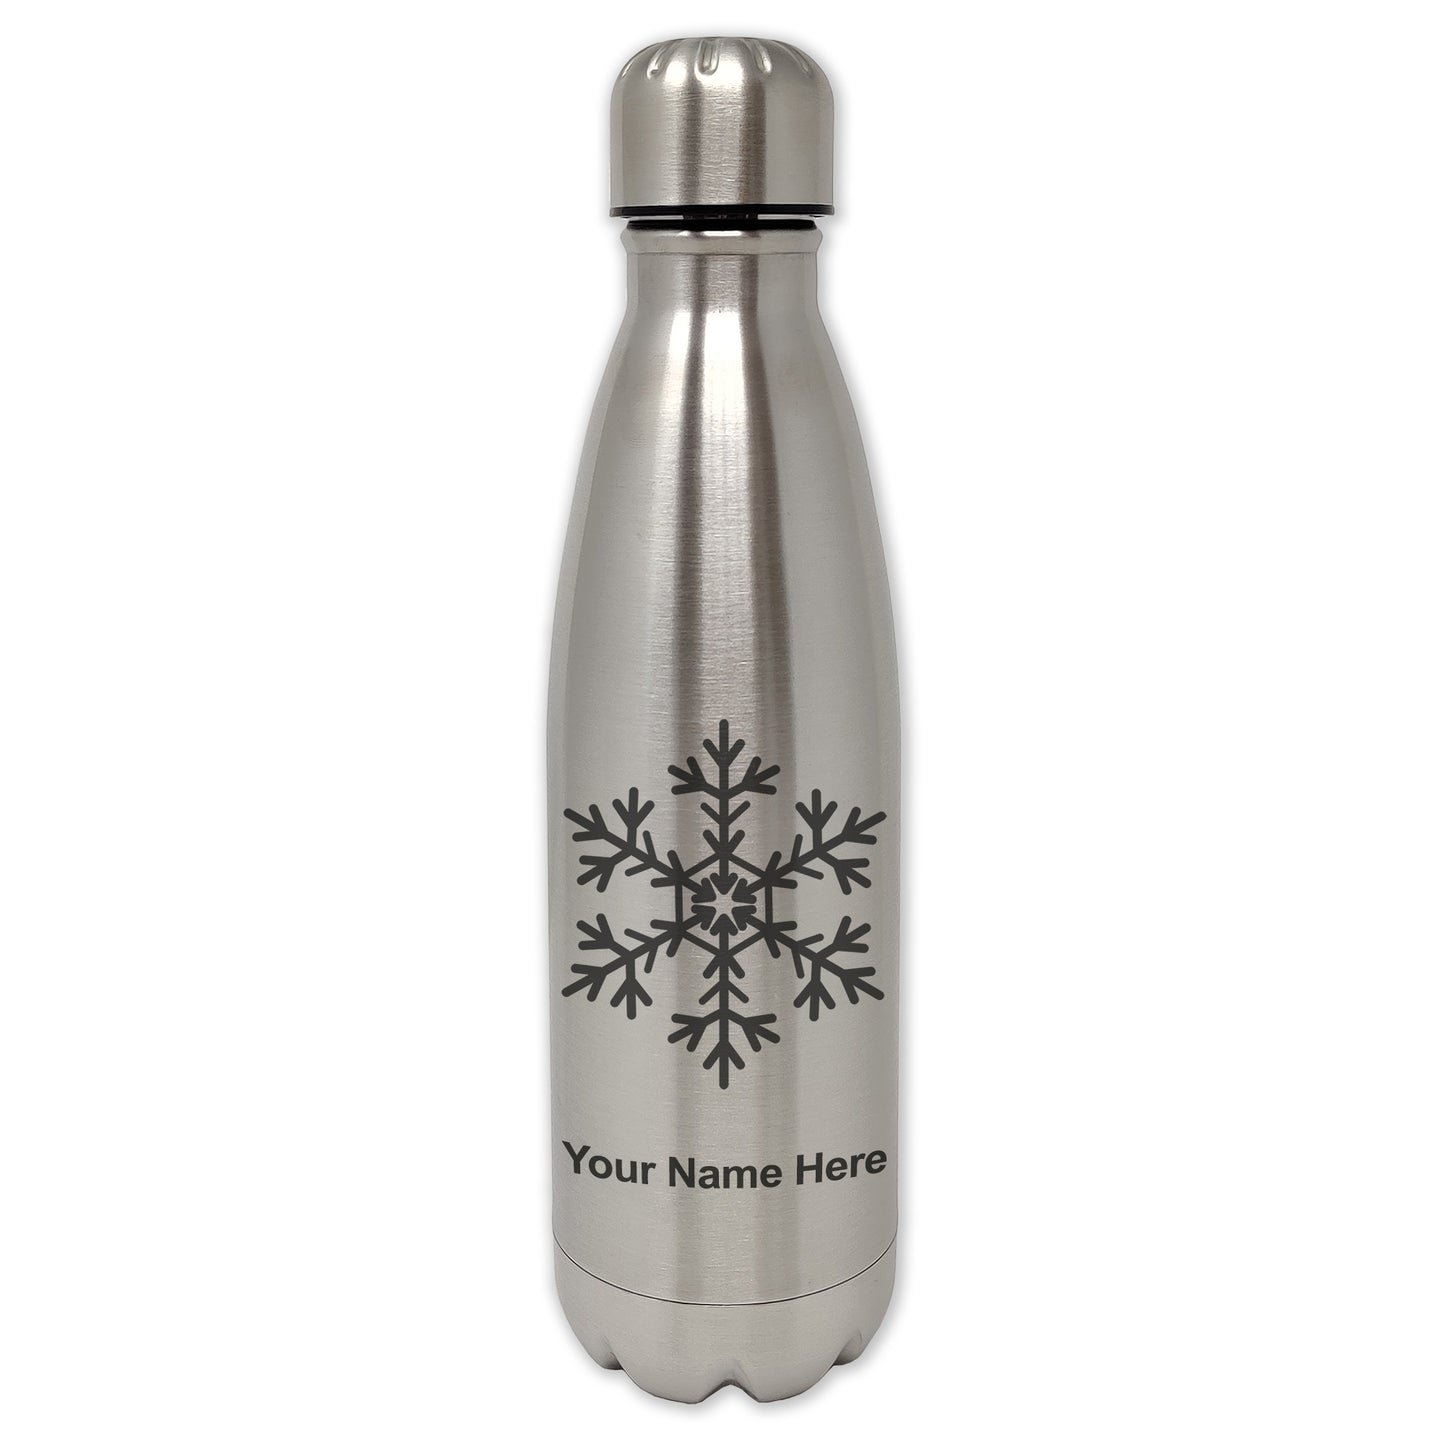 LaserGram Double Wall Water Bottle, Snowflake, Personalized Engraving Included